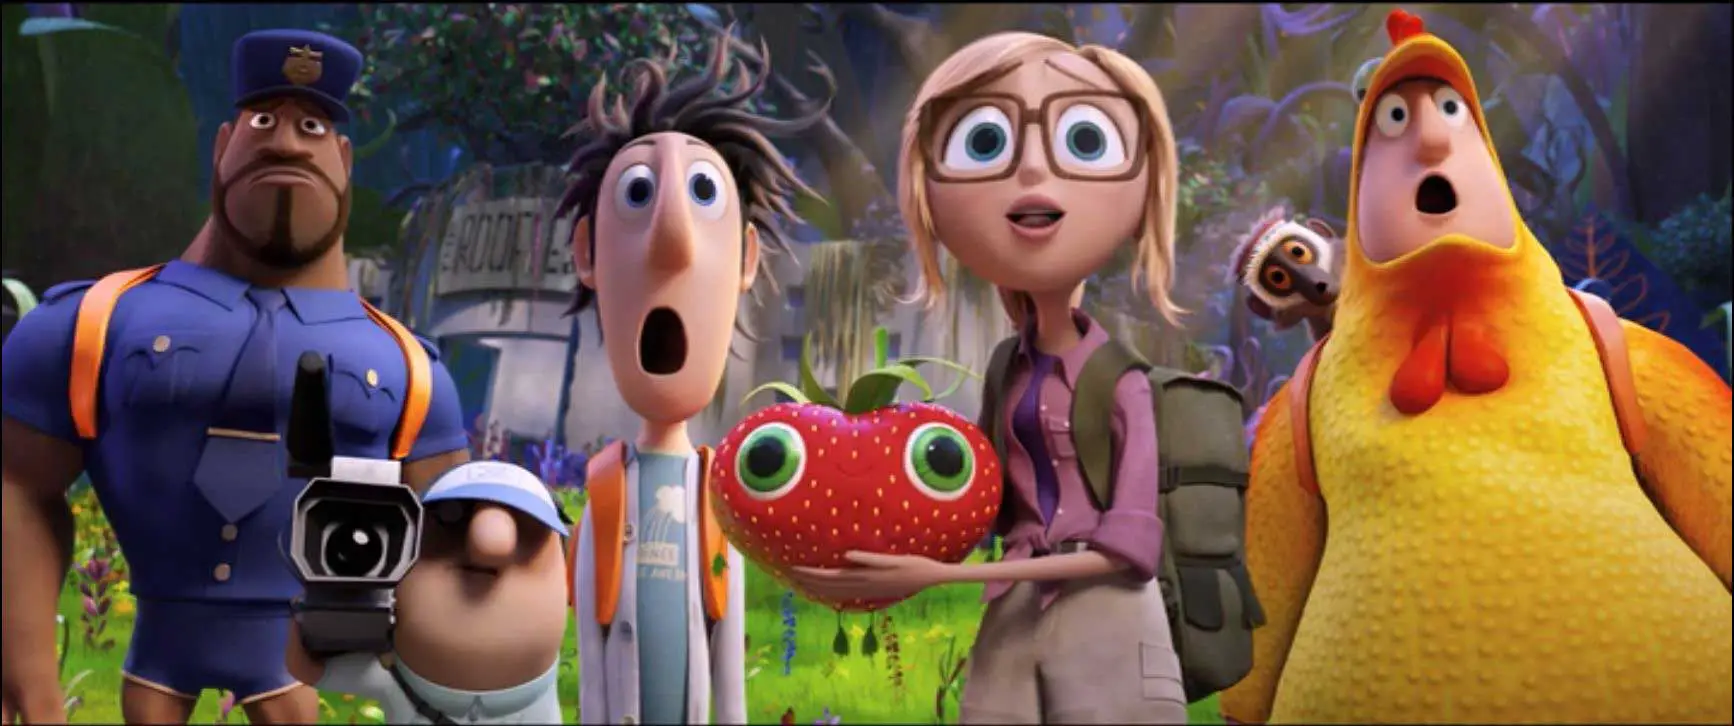 Cloudy with a Chance of Meatballs 2 Download.